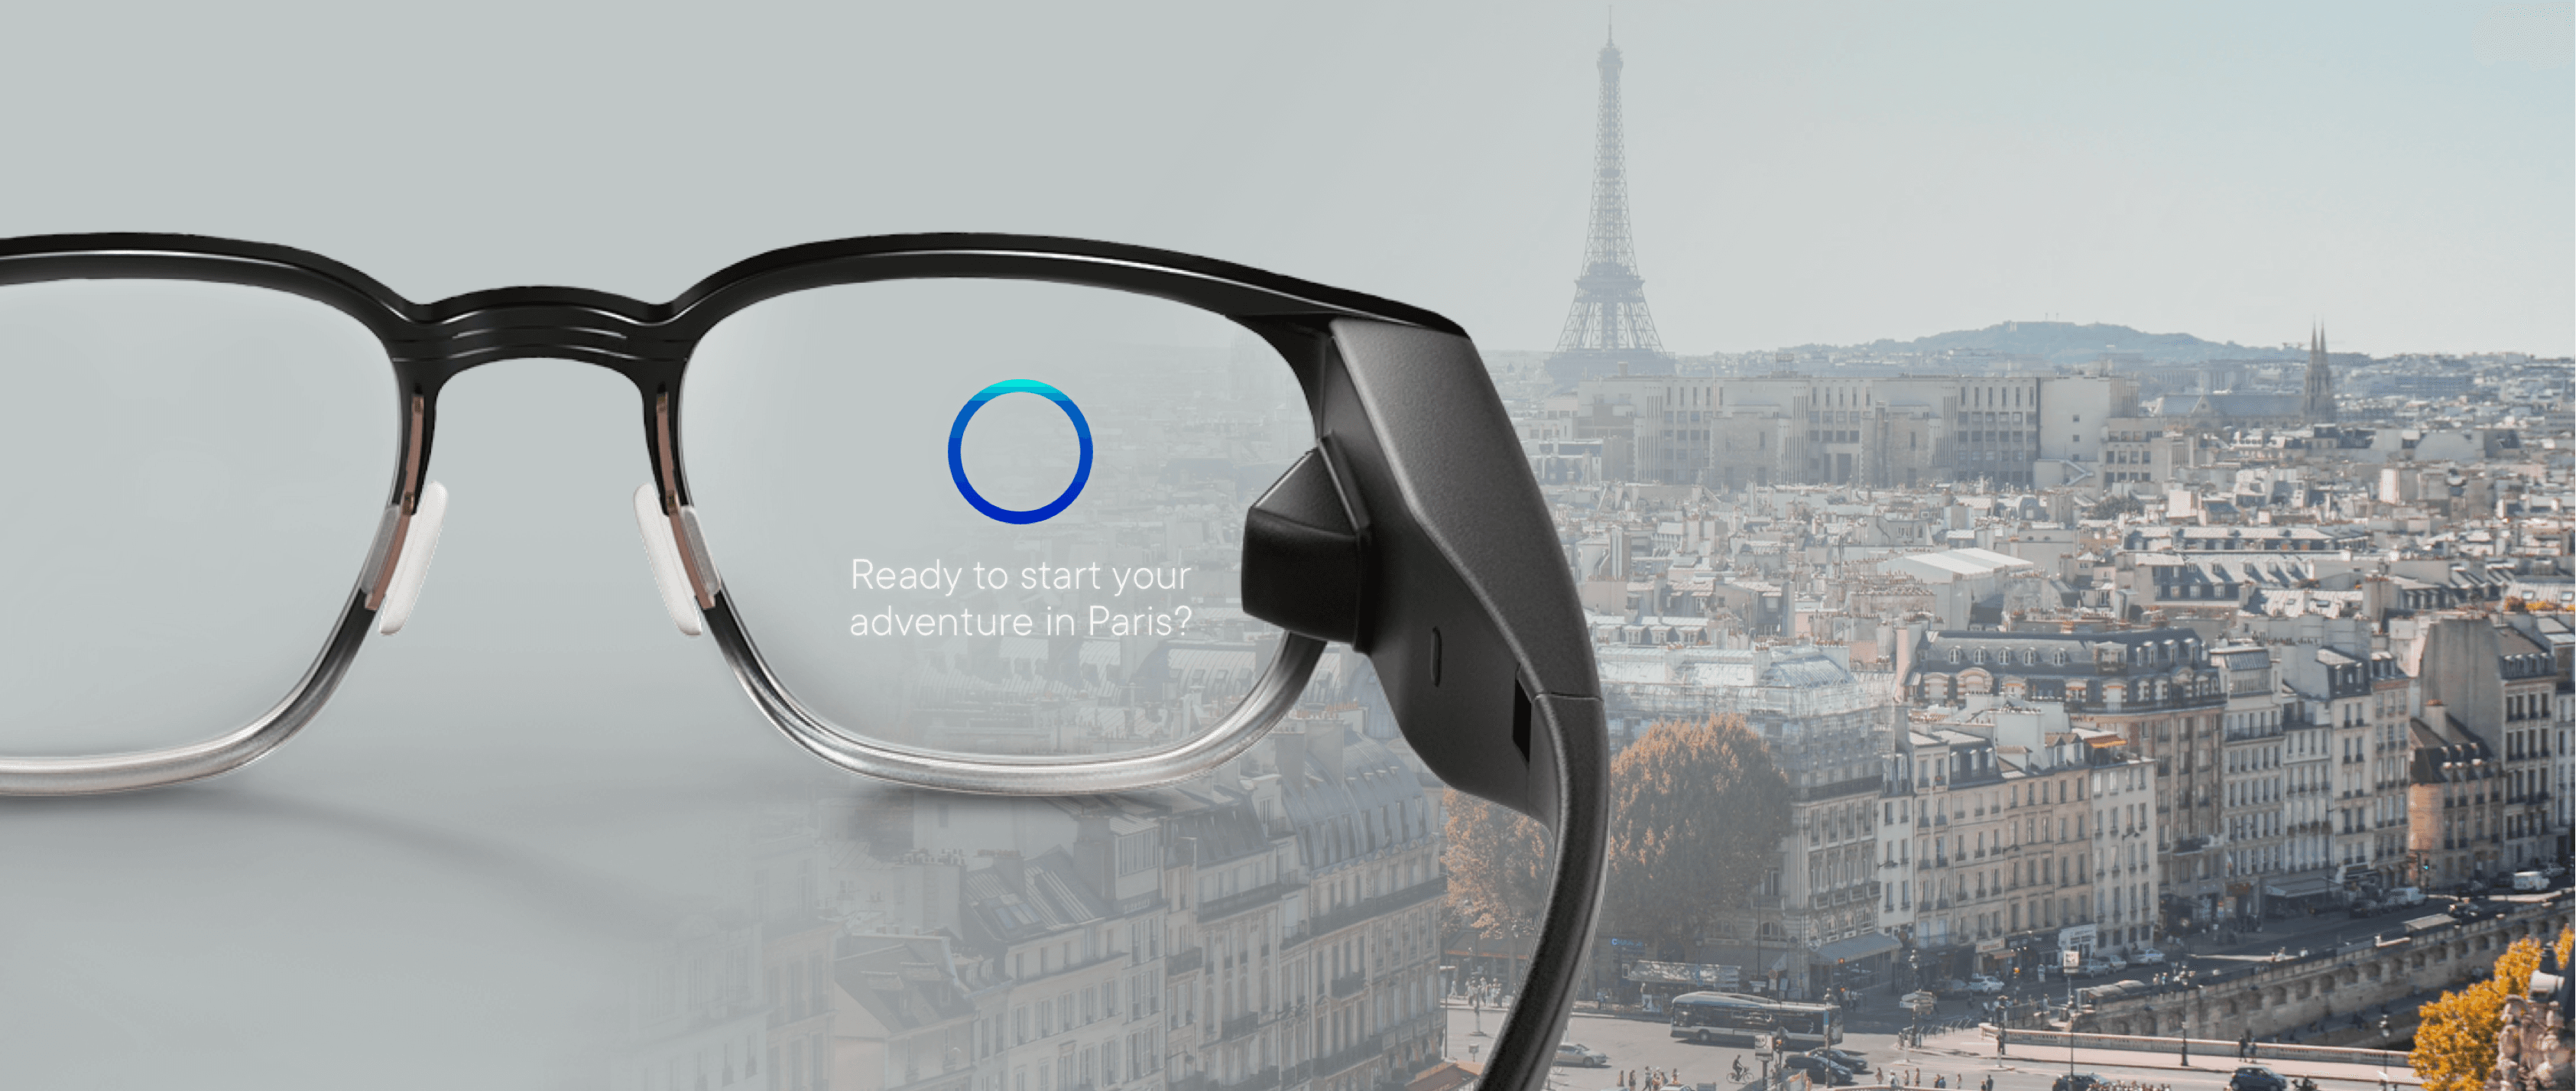 A Pair of North AR smart glasses imposed on a background of Paris with the Eiffel Tower. The glasses say "Ready to start your adventure in Paris?"